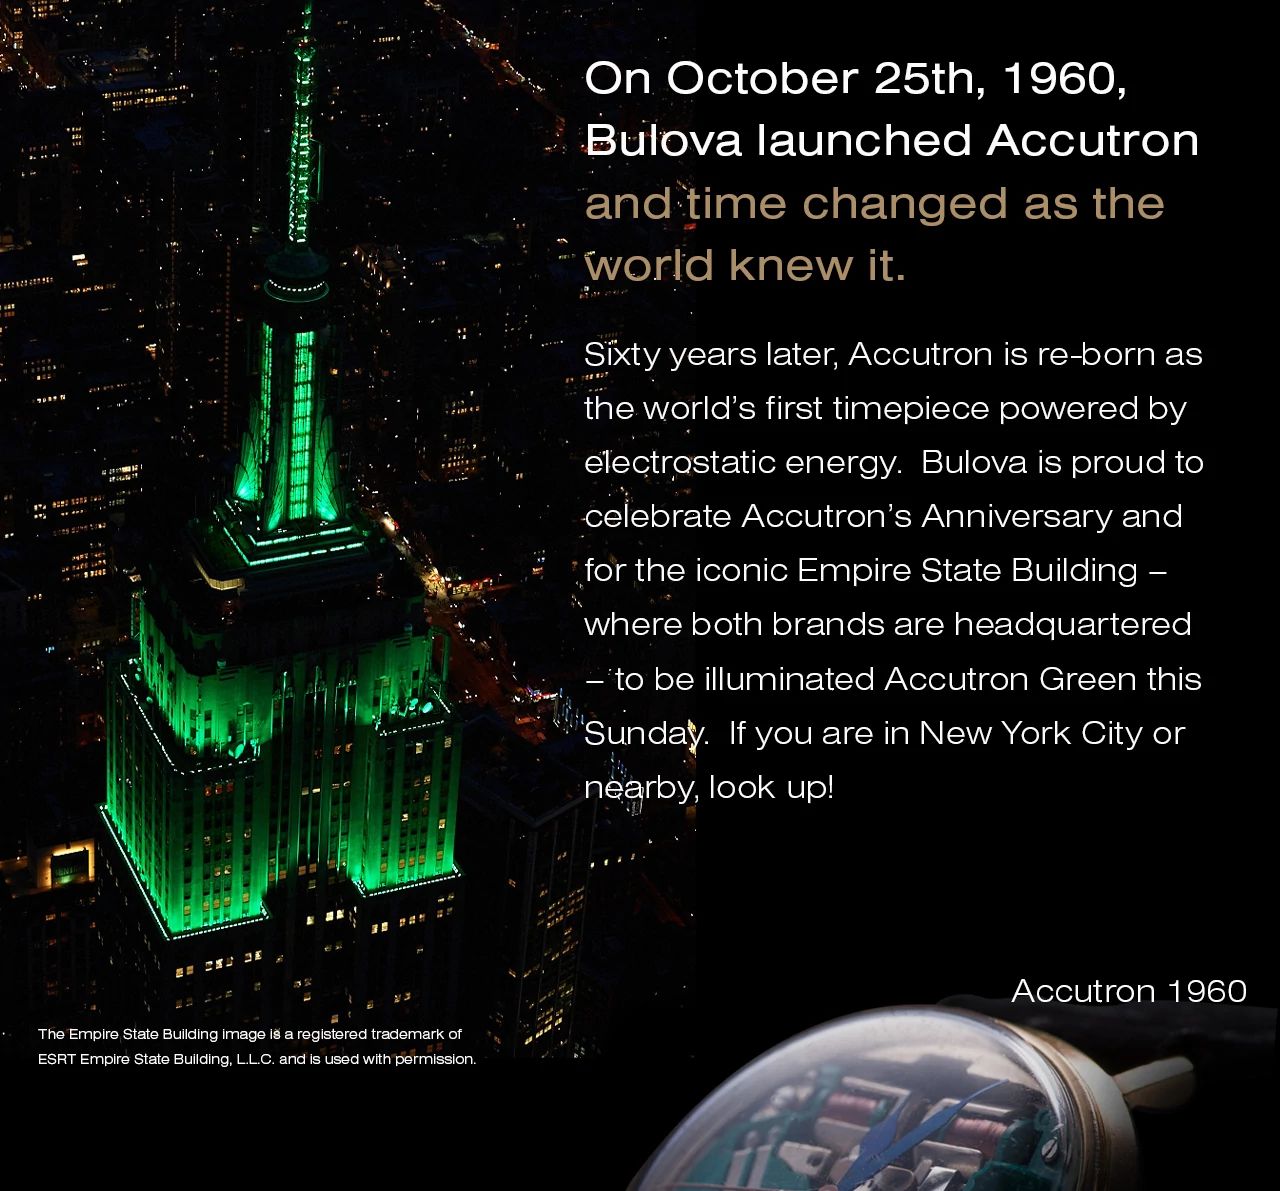 On October 25th, 1960, Bulova launched Accutron and time changed as the world knew it.